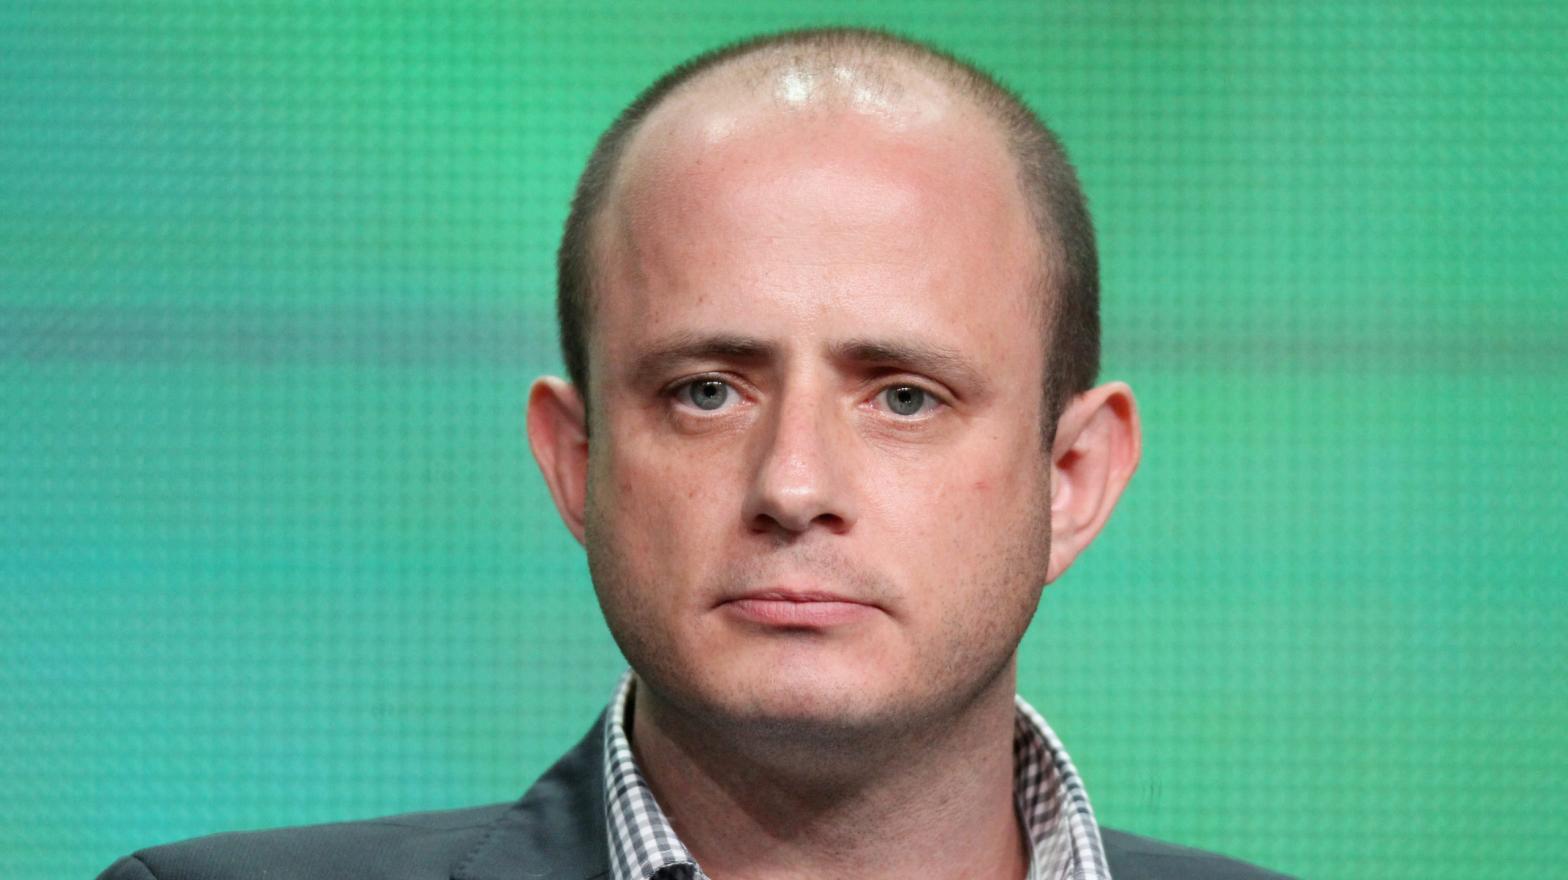 Eric Kripke speaking on a panel about Revolution. (Photo: Frederick M. Brown/Getty, Getty Images)